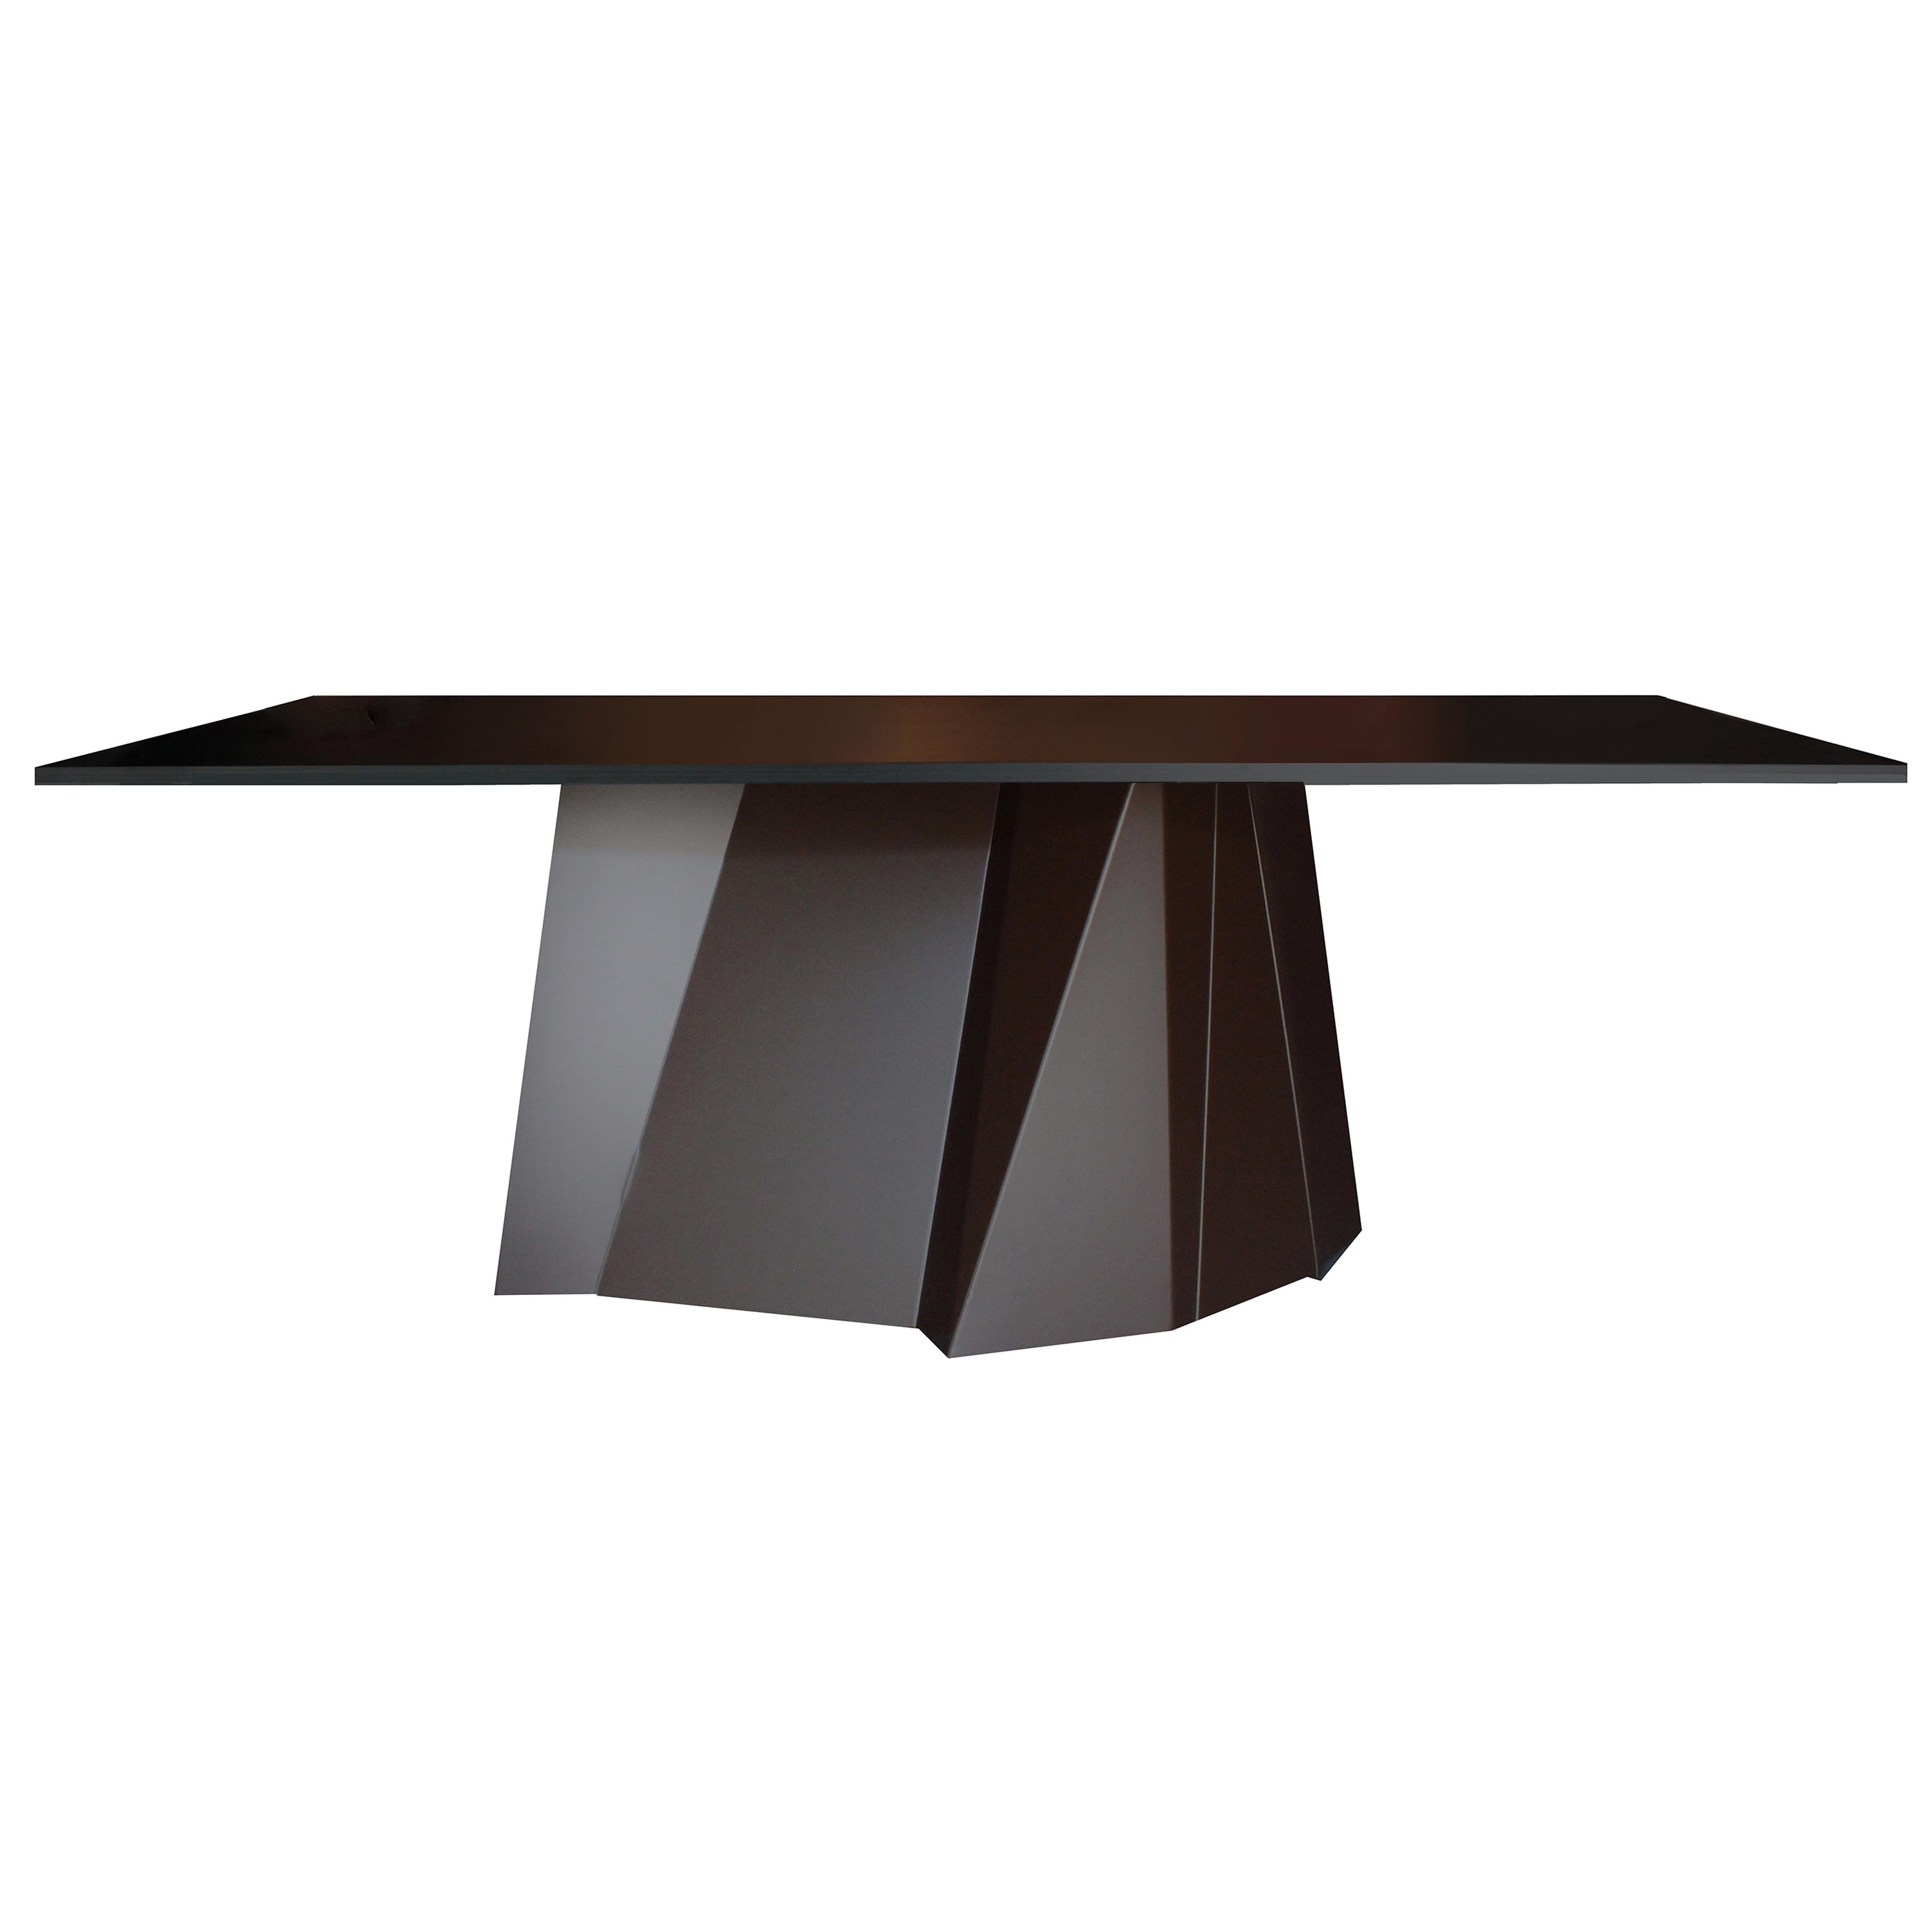 Contemporary Table, Limited Edition, Signed by the Artist Raoul Gilioli